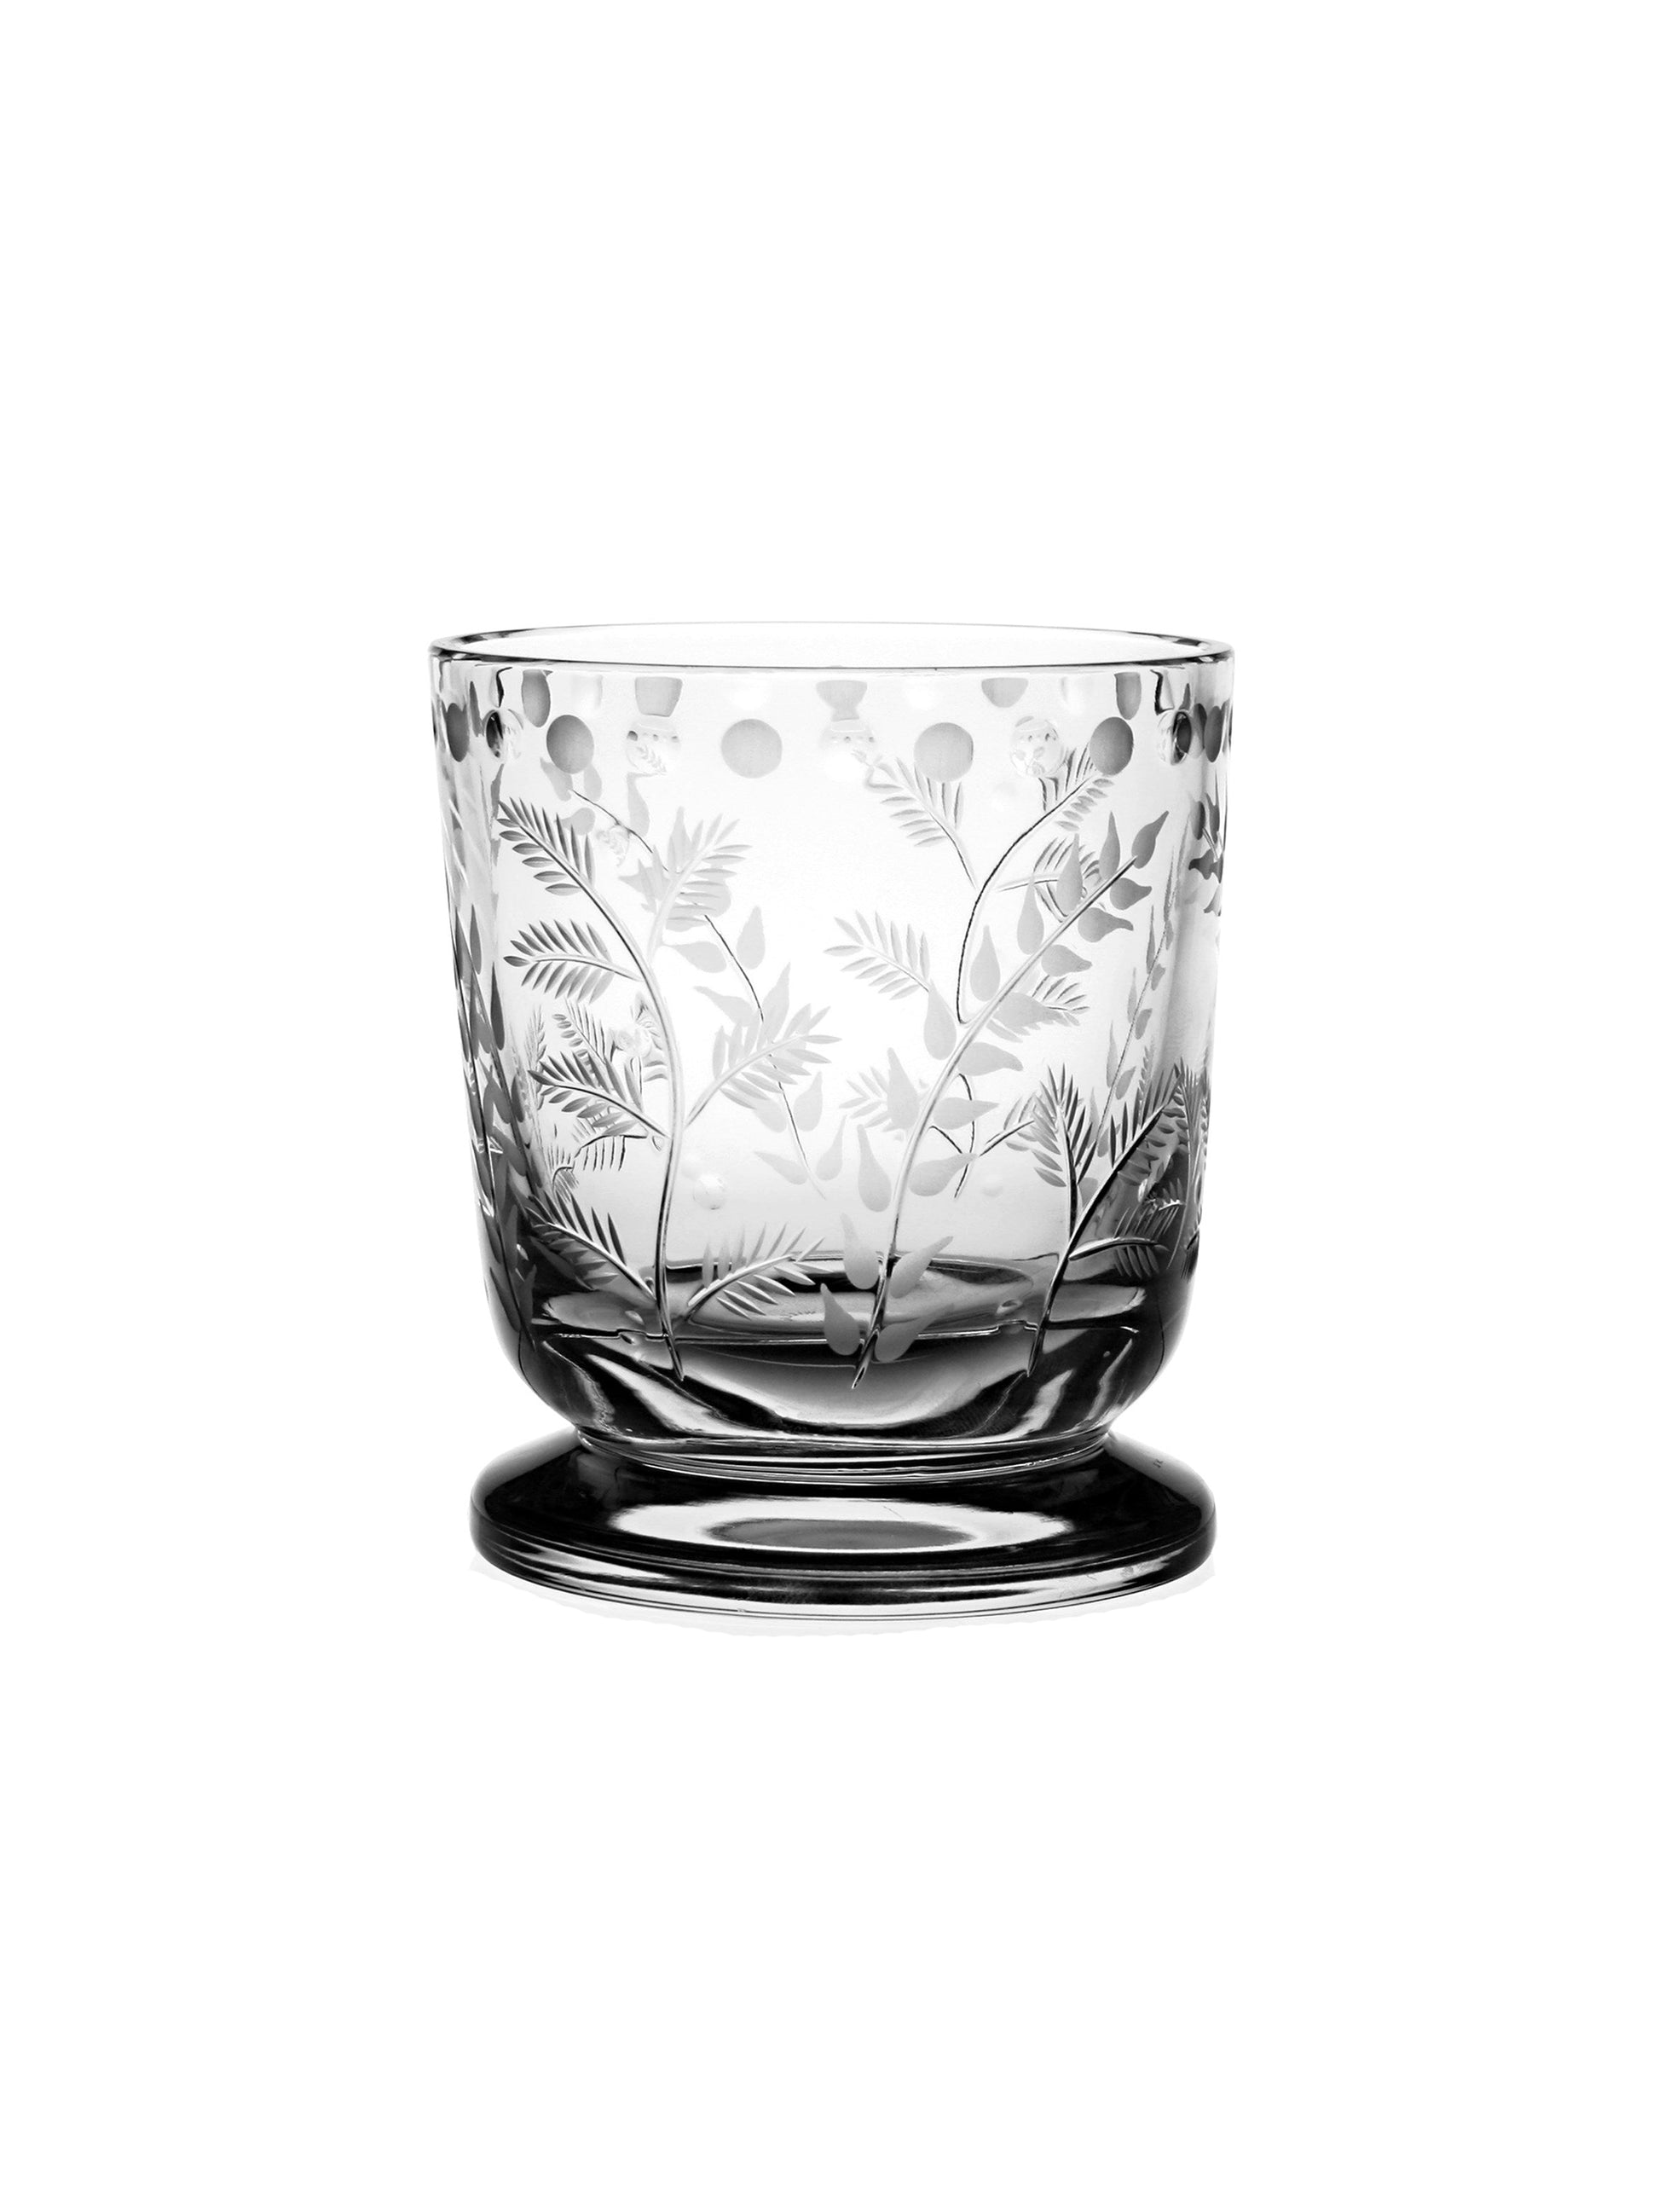 William Yeoward Crystal Fern Footed Vase 4.5 Inches Weston Table